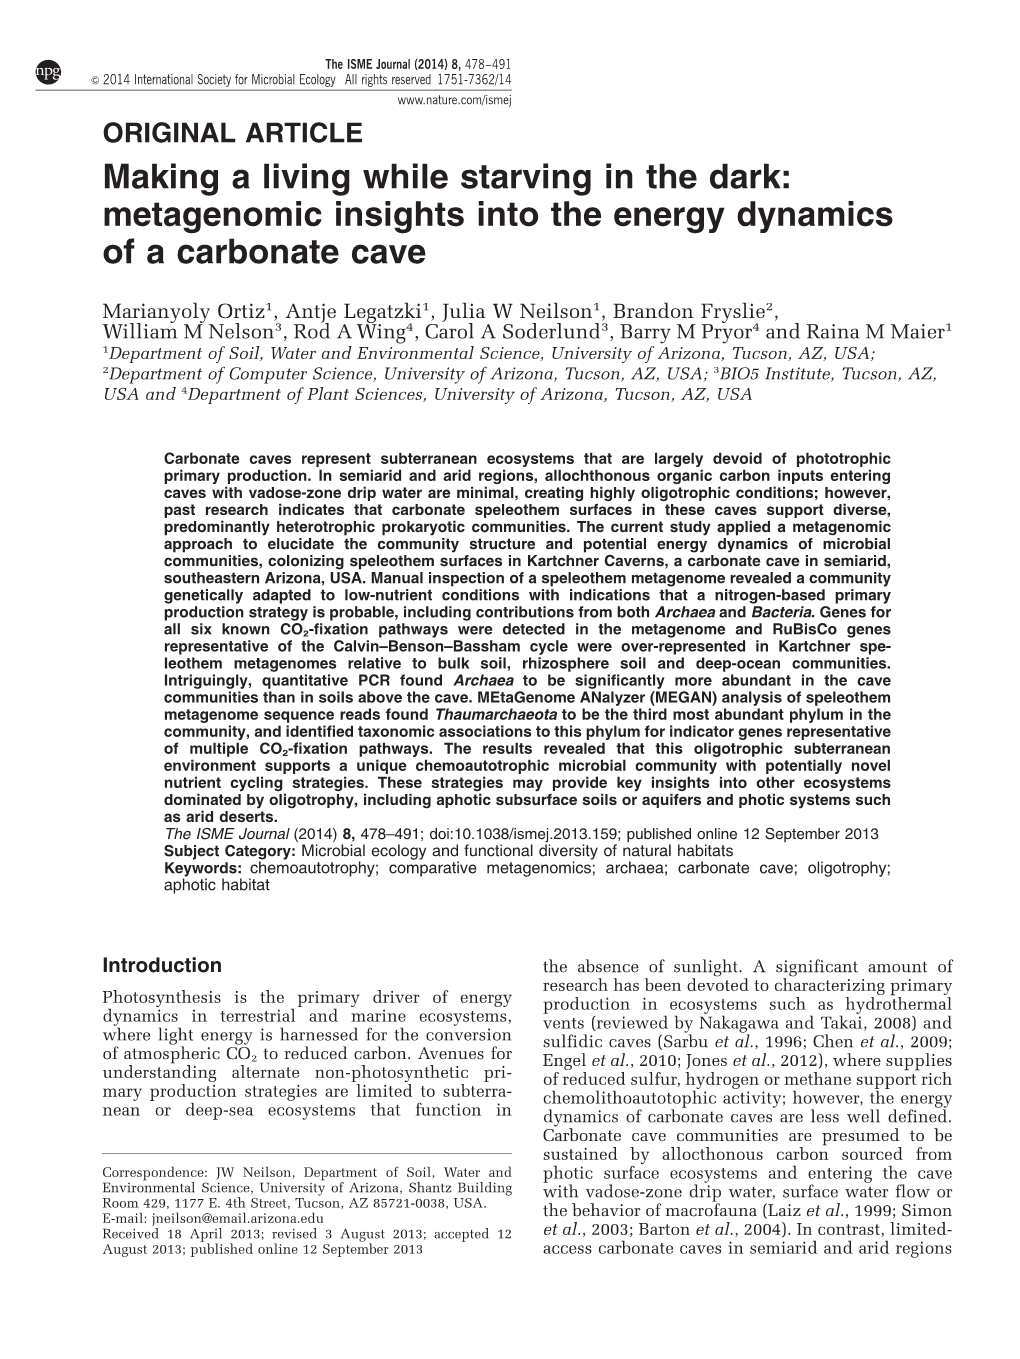 Metagenomic Insights Into the Energy Dynamics of a Carbonate Cave